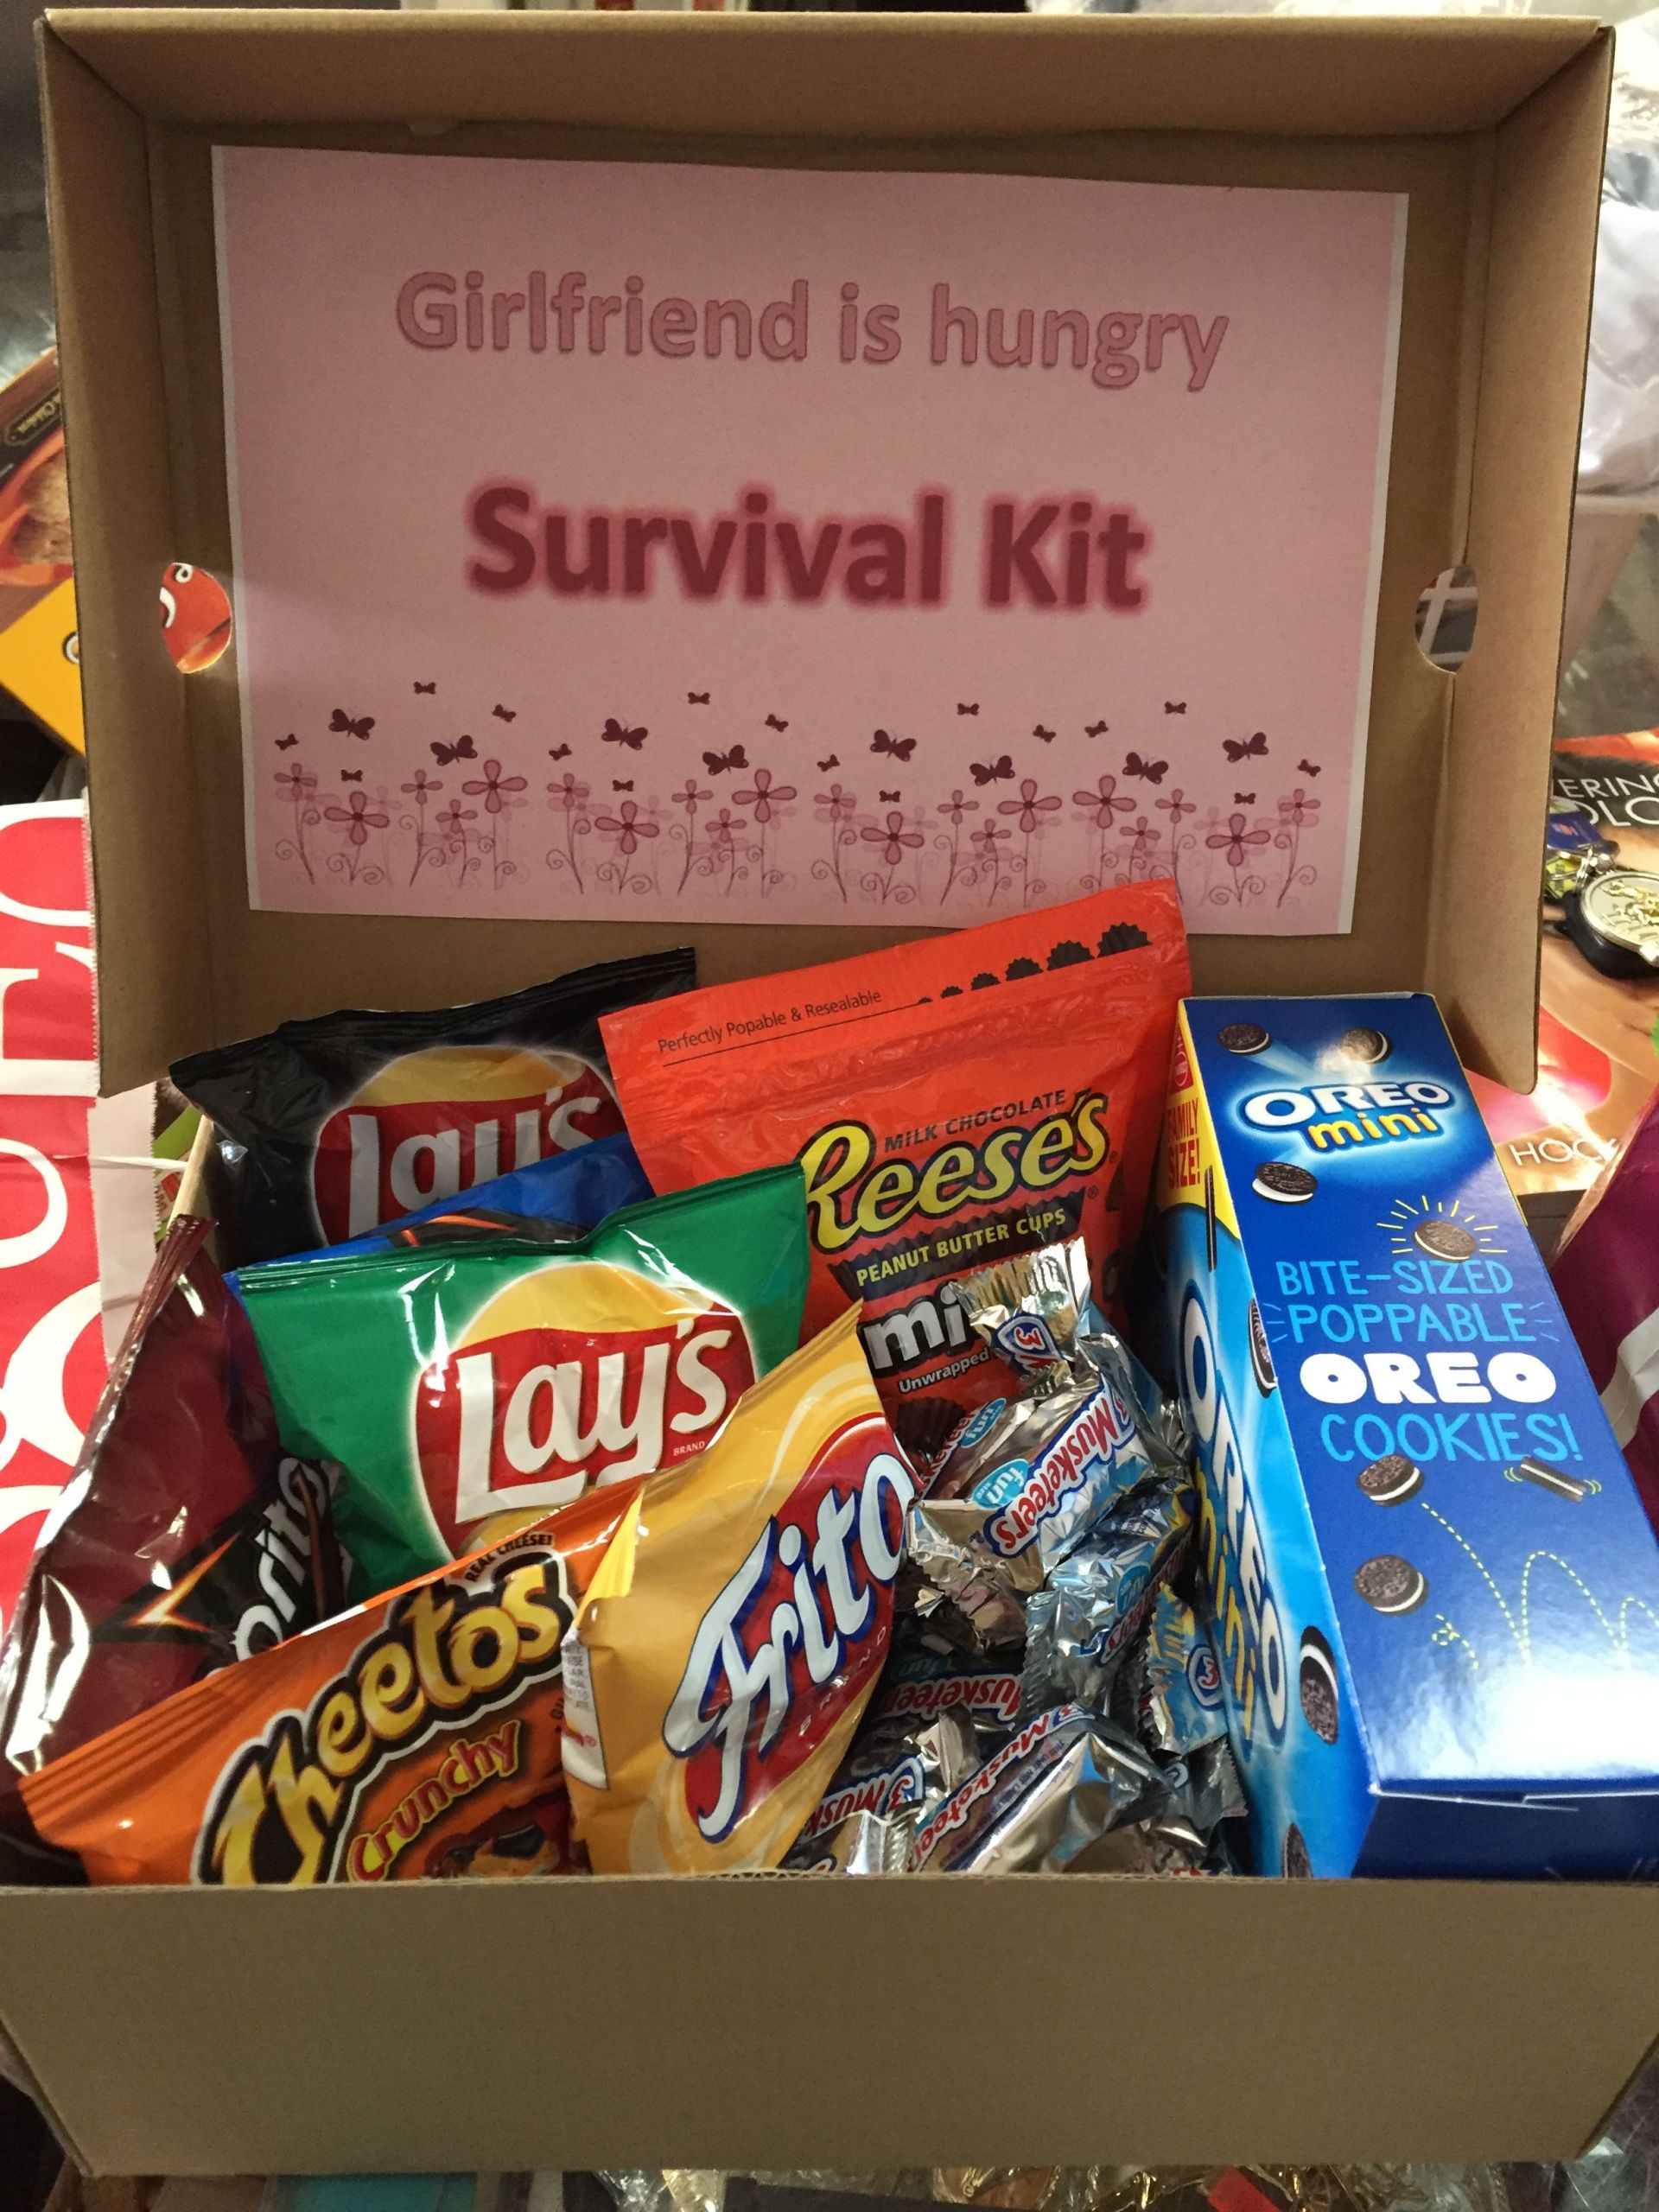 Unique Gift Ideas Girlfriend
 You can keep this girlfriend survival kit in your car for